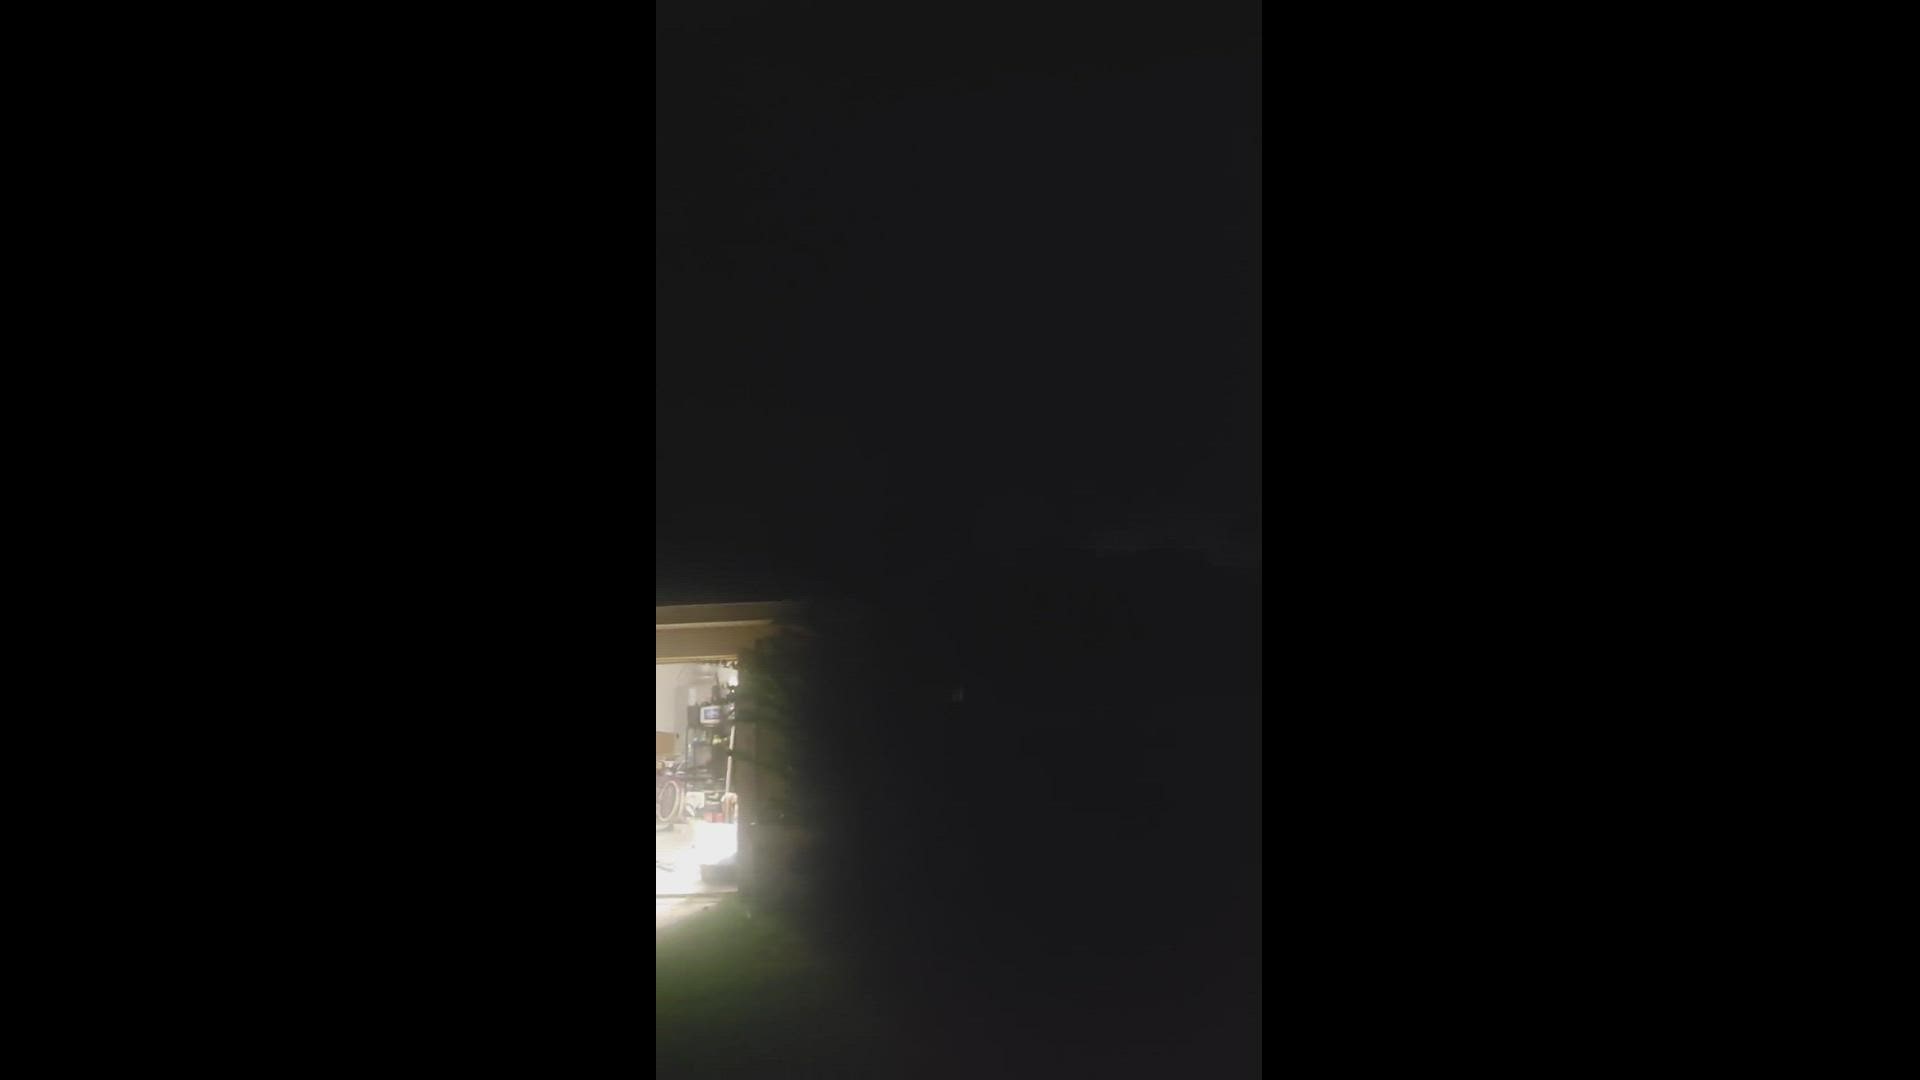 Check out this video sent to us through our app showing a neat light show provided by lightning near Yulee.
Credit: Dempsey fields